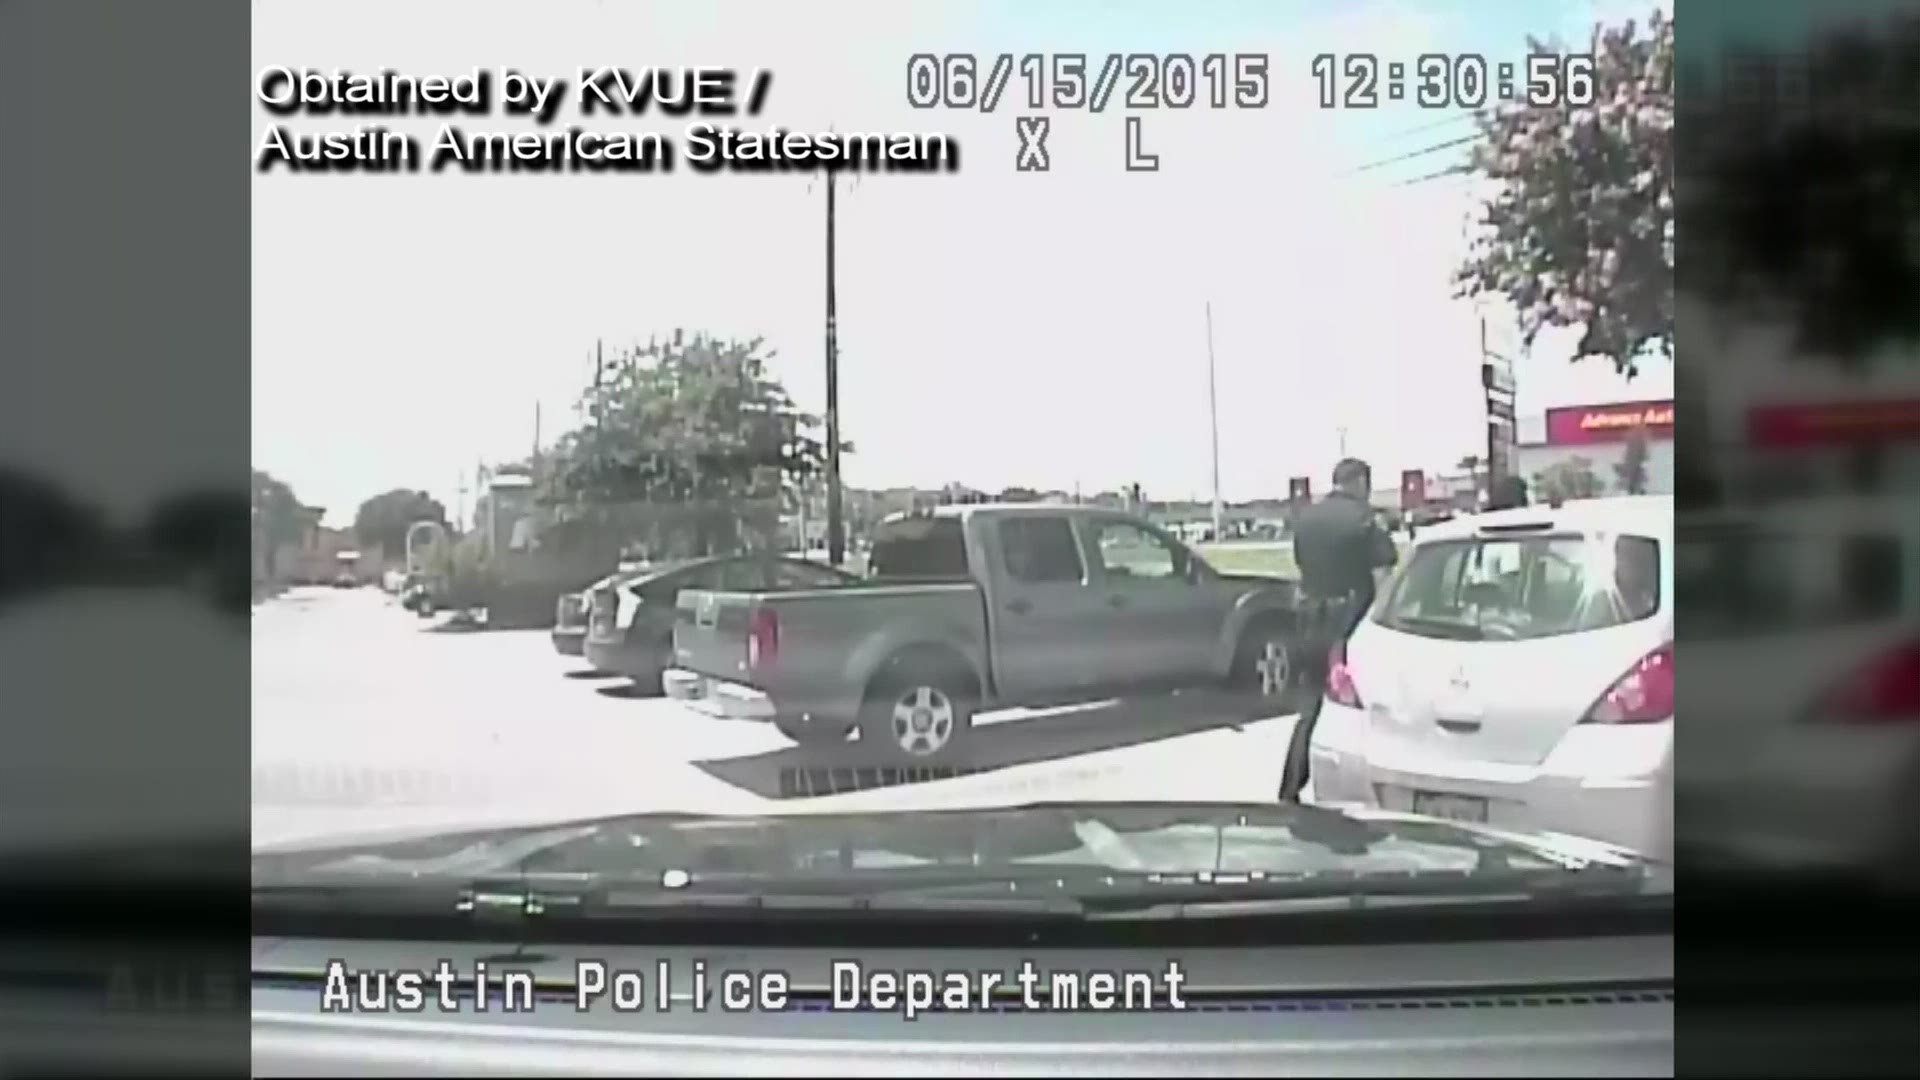 Dash camera video showing arrest of Breaion King on June 15, 2015.